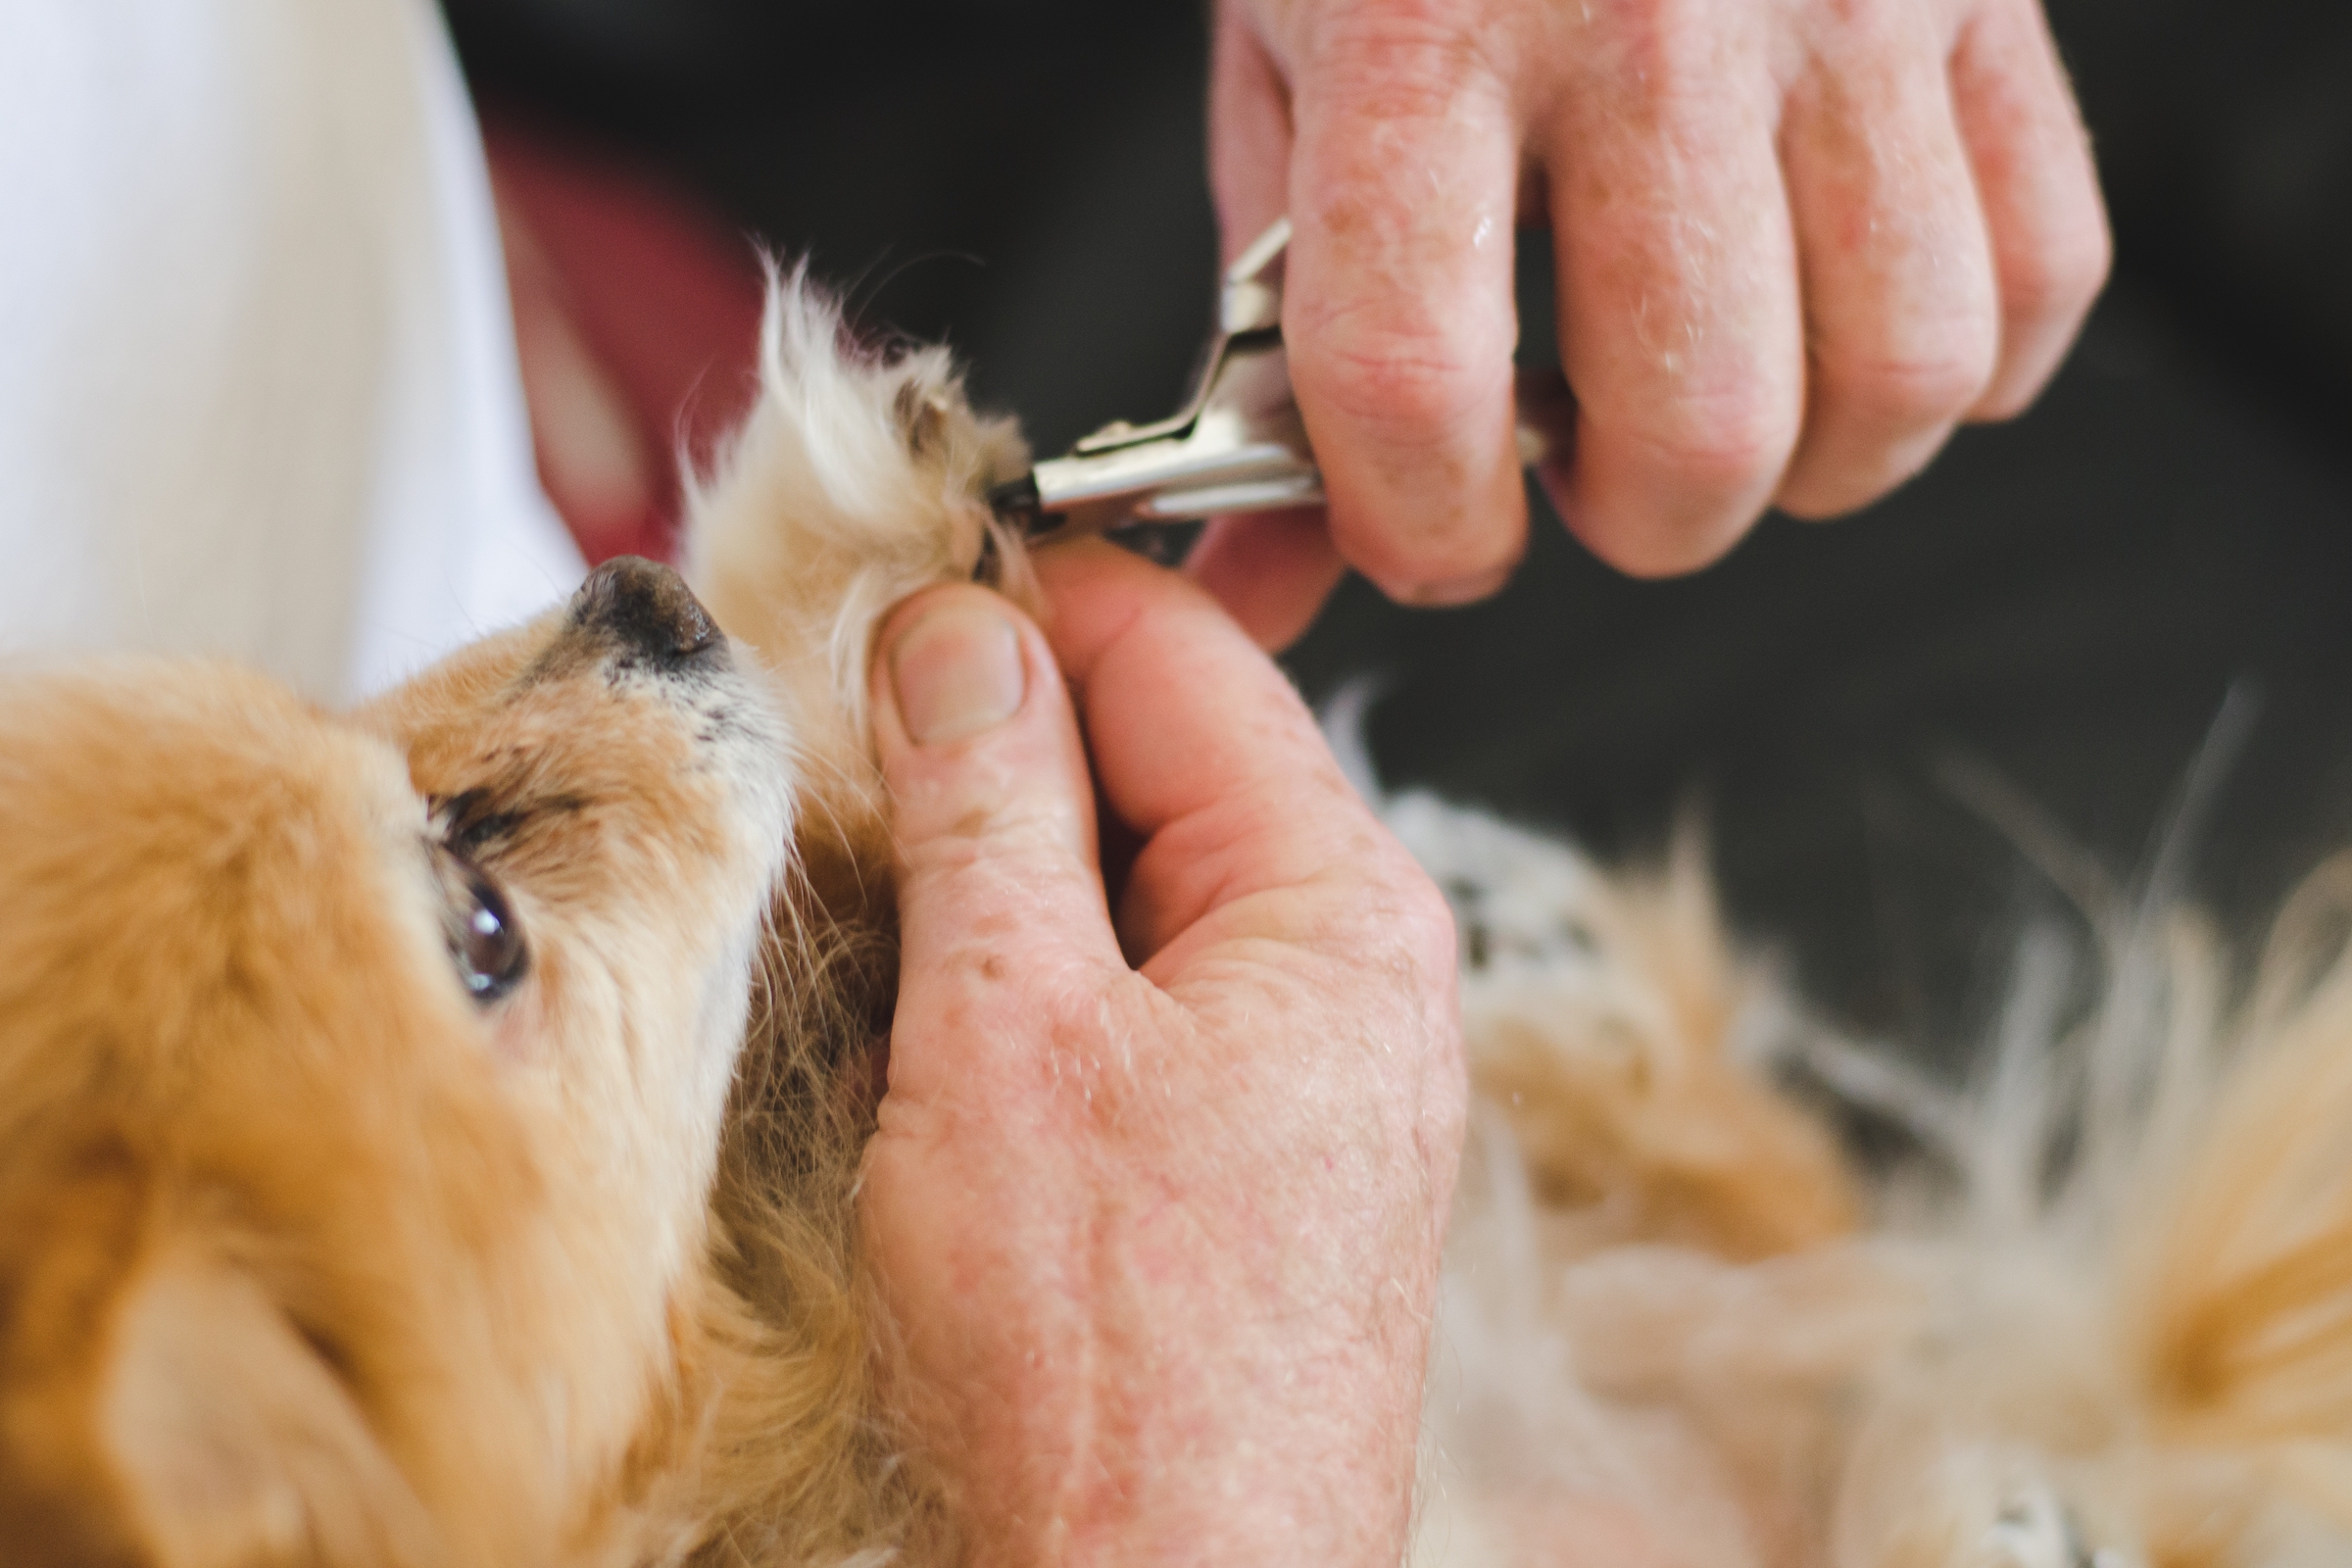 5 Steps To Trim Your Puppy's Nails Without Fuss | PawTracks